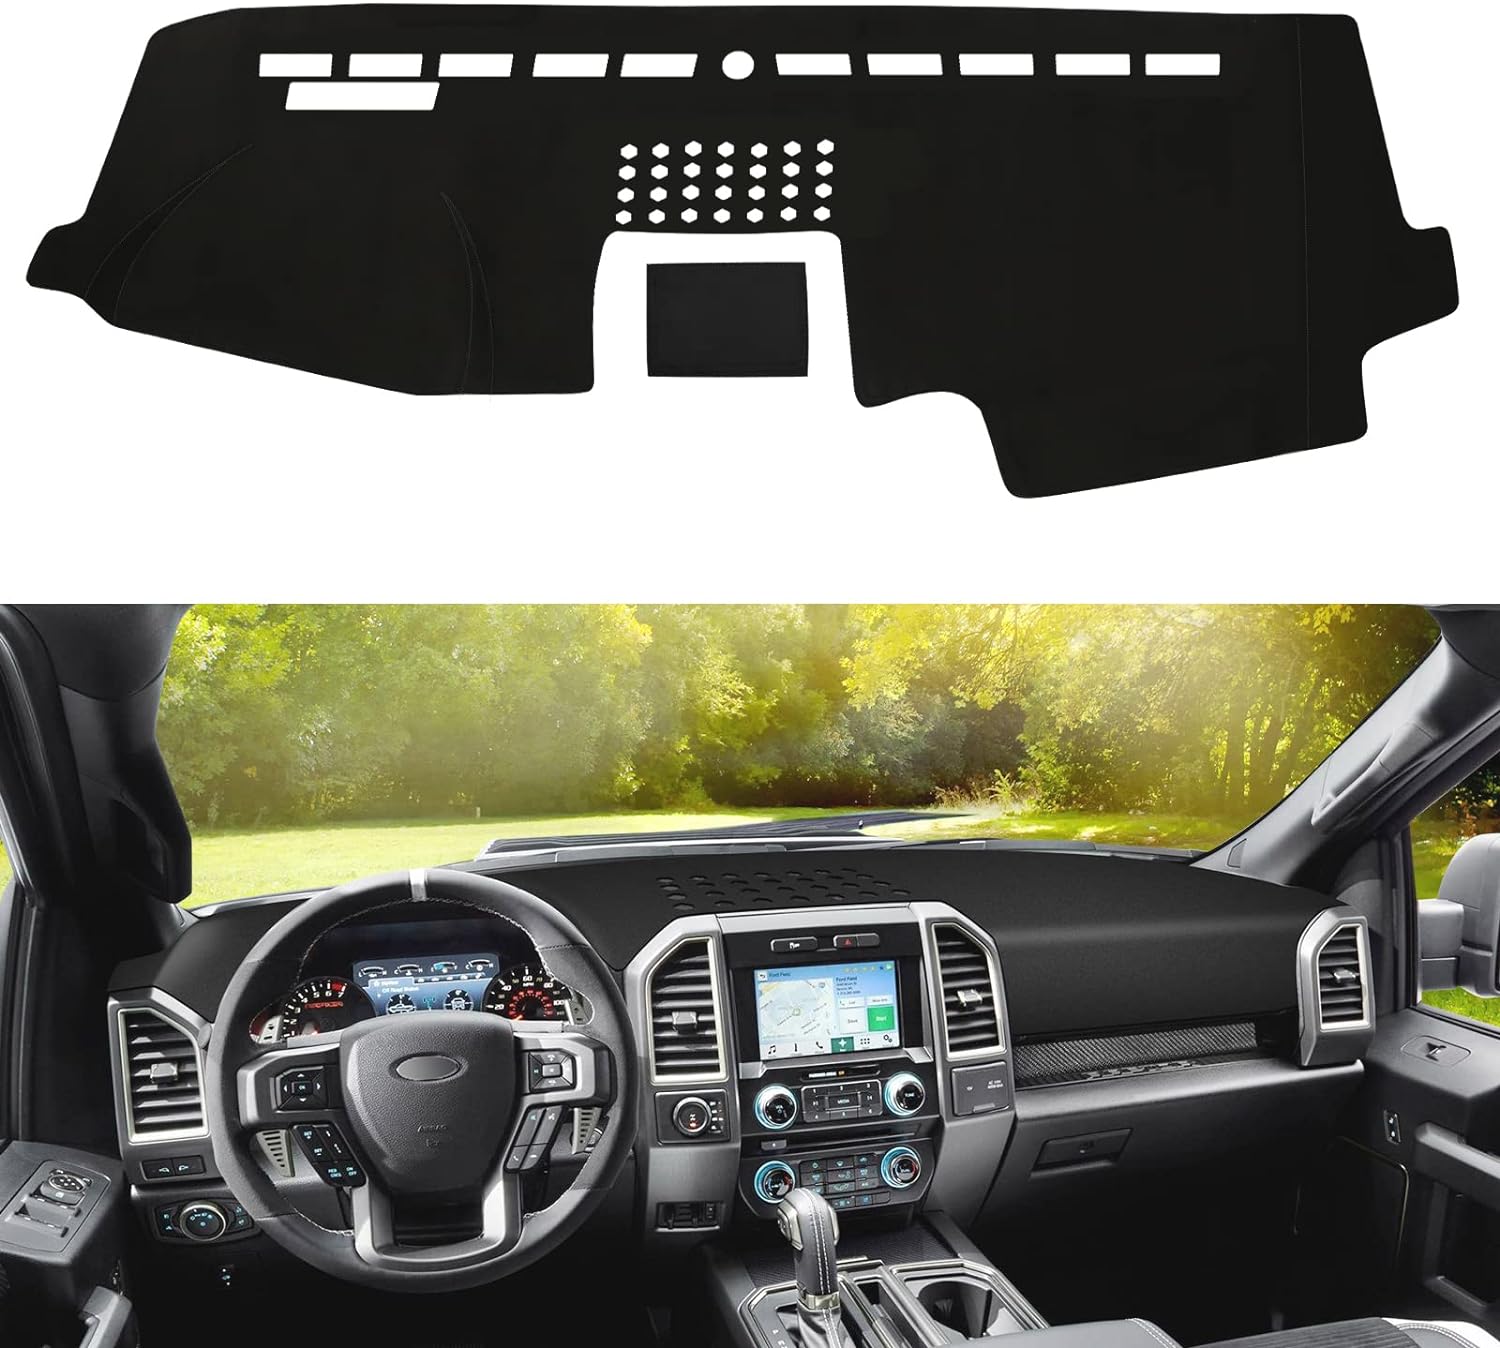 SUPAREE Ford F150 Dashboard Cover Dash Mat Interior Protecter Cover for 2015-2020 Product description